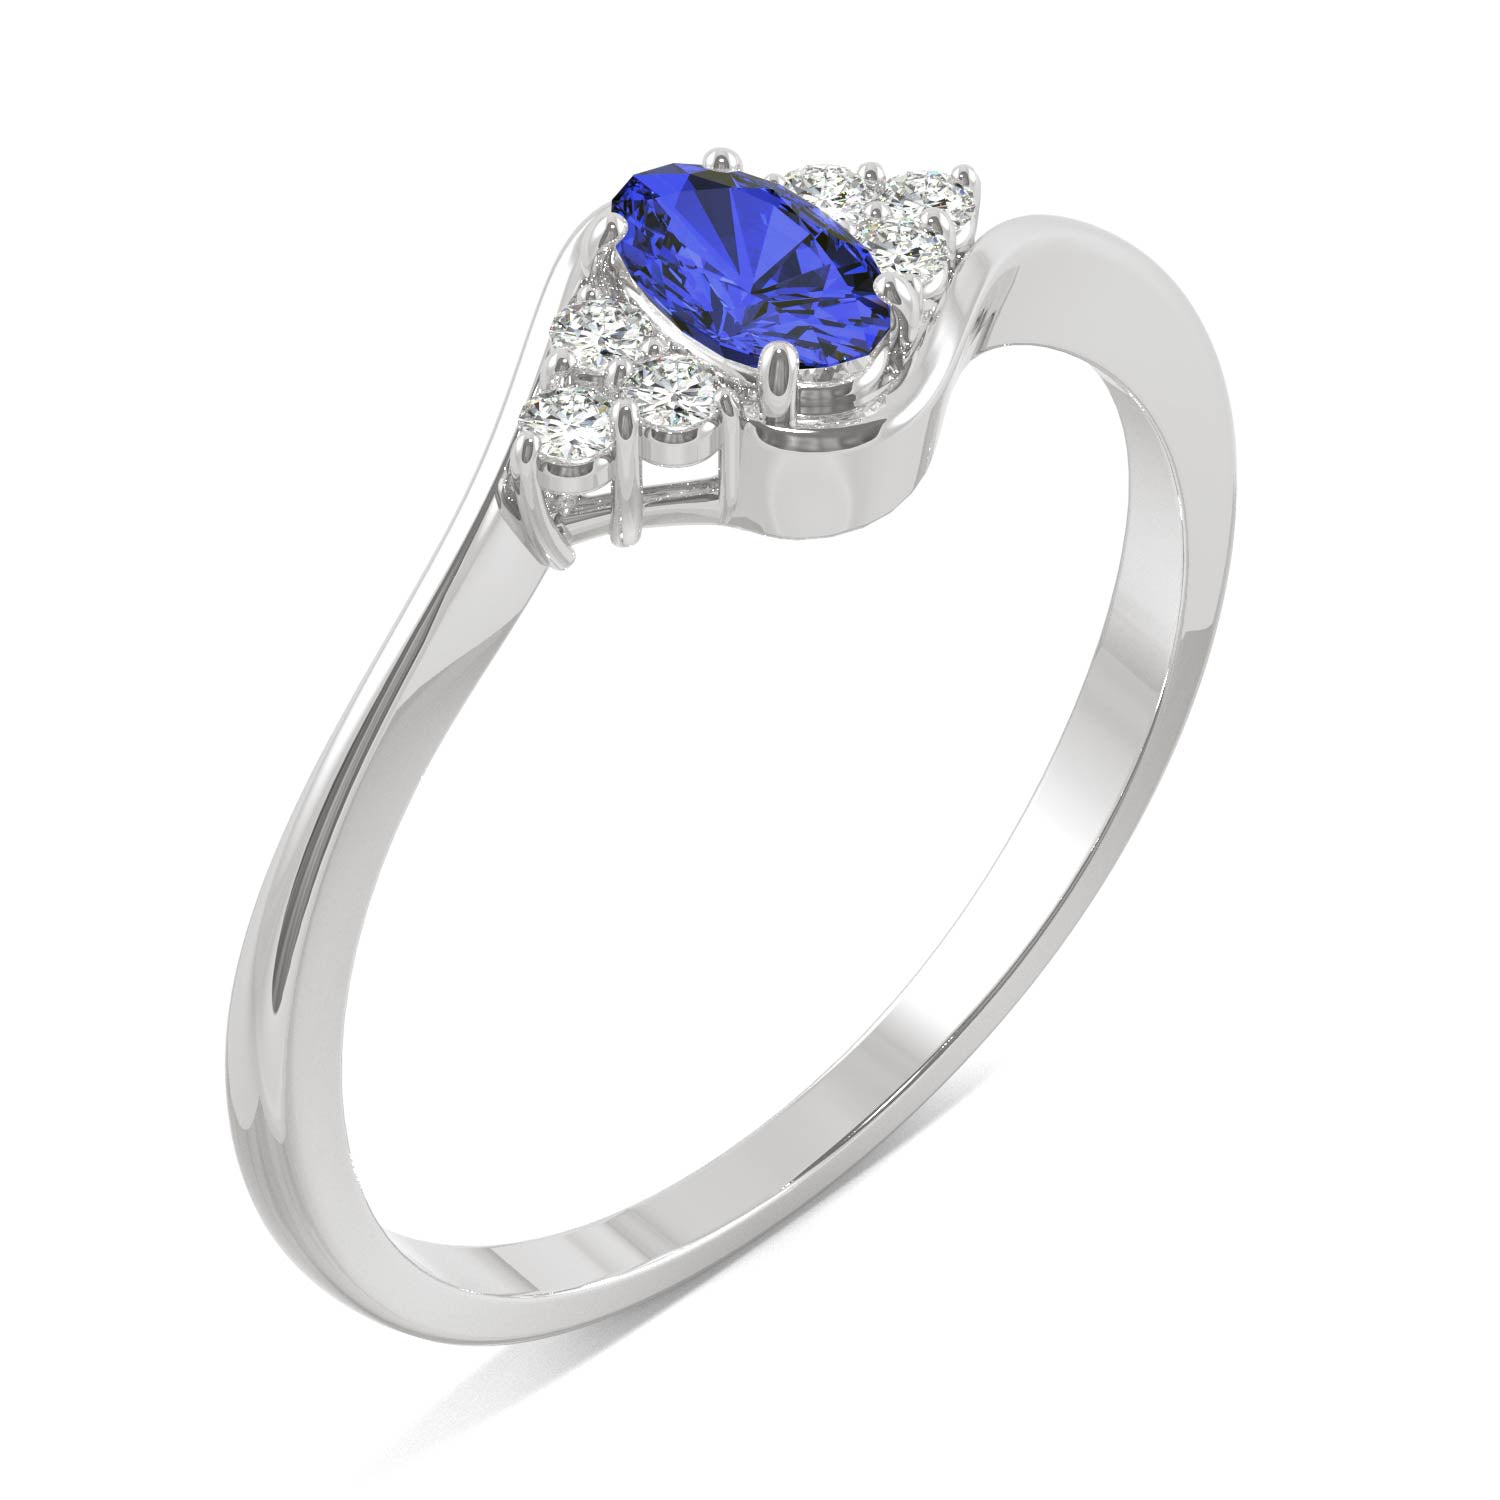 0.37 CTW DEW Oval Sapphire Bypass Ring in 14K White Gold